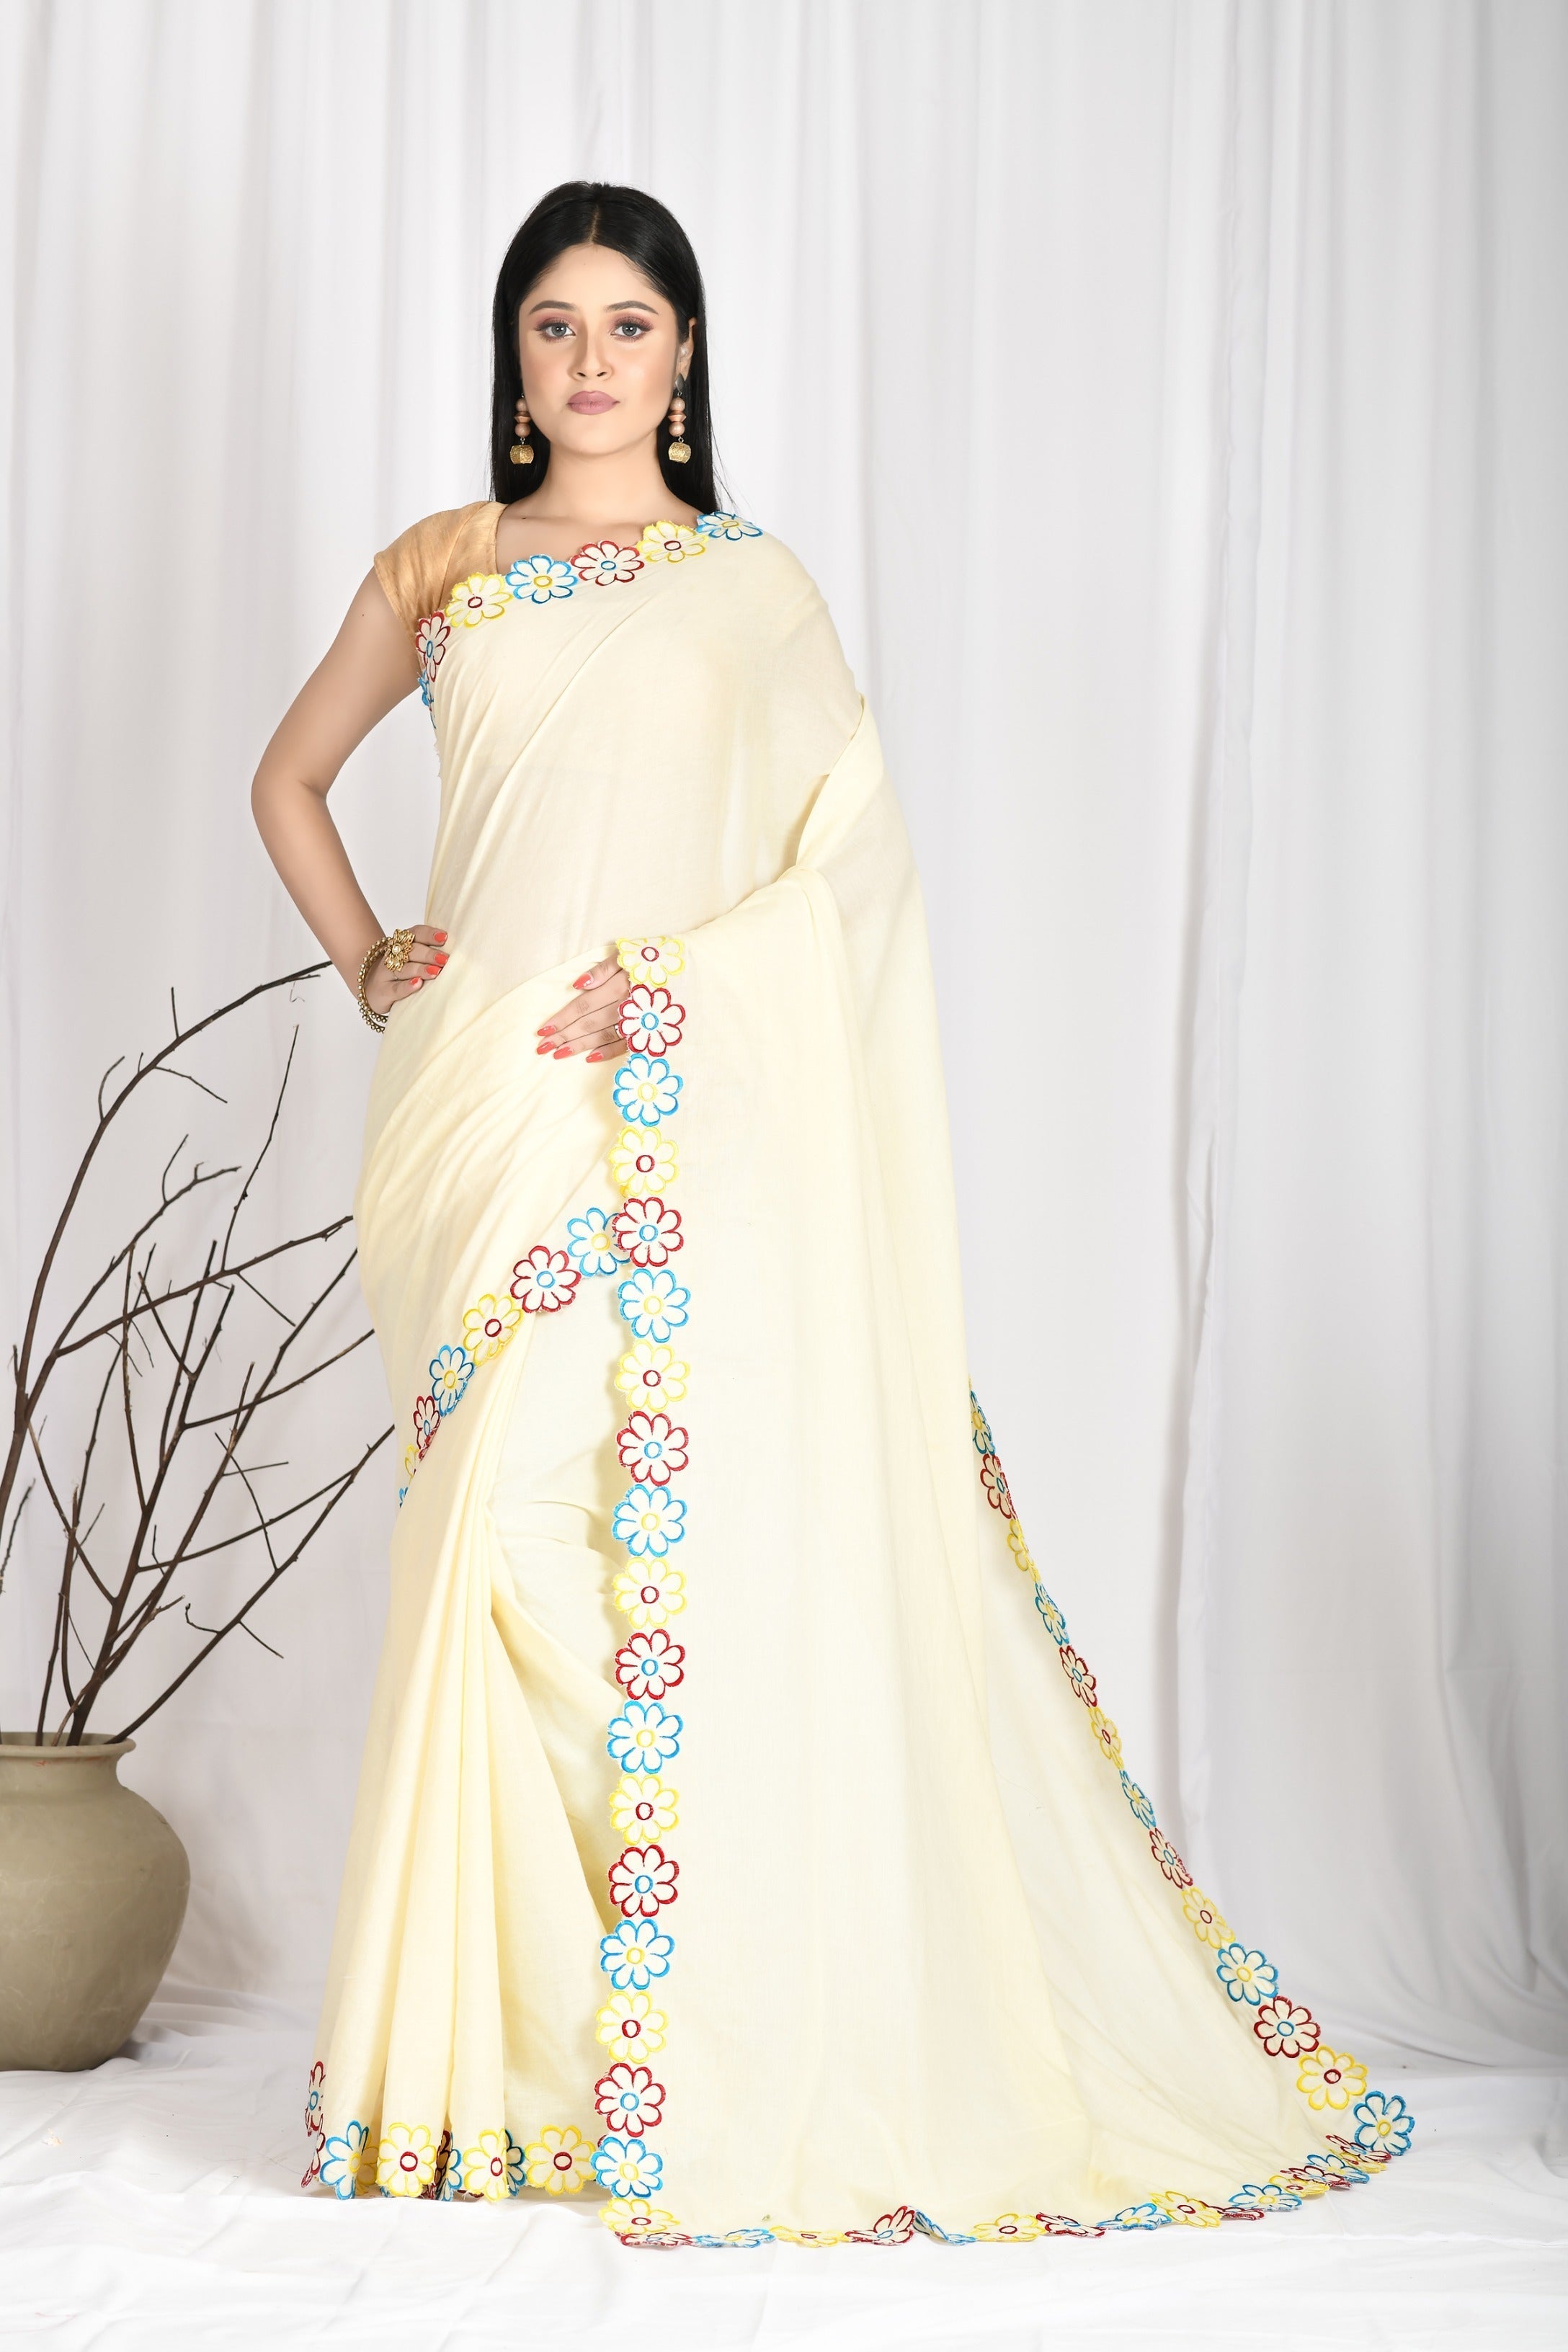 Women's Hand Embroidered Cotton Mul Mul Beige Color Saree With Blouse - Saras The Label